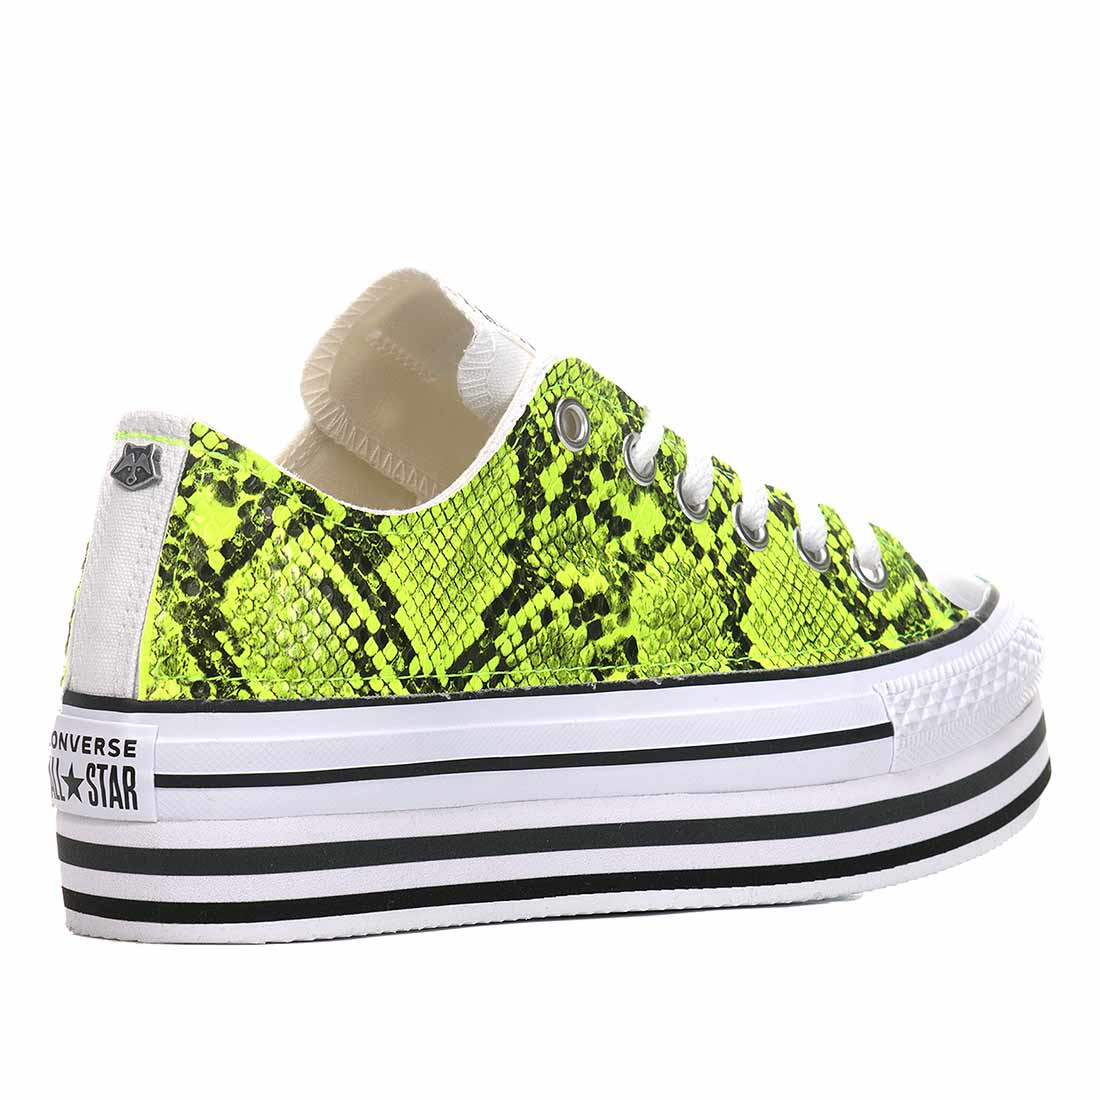 Perceptivo Condición Injusto Converse All Star Basse Layer Pitone Fluo - Gialle | Sped. 24h GRATIS –  Racoon Lab